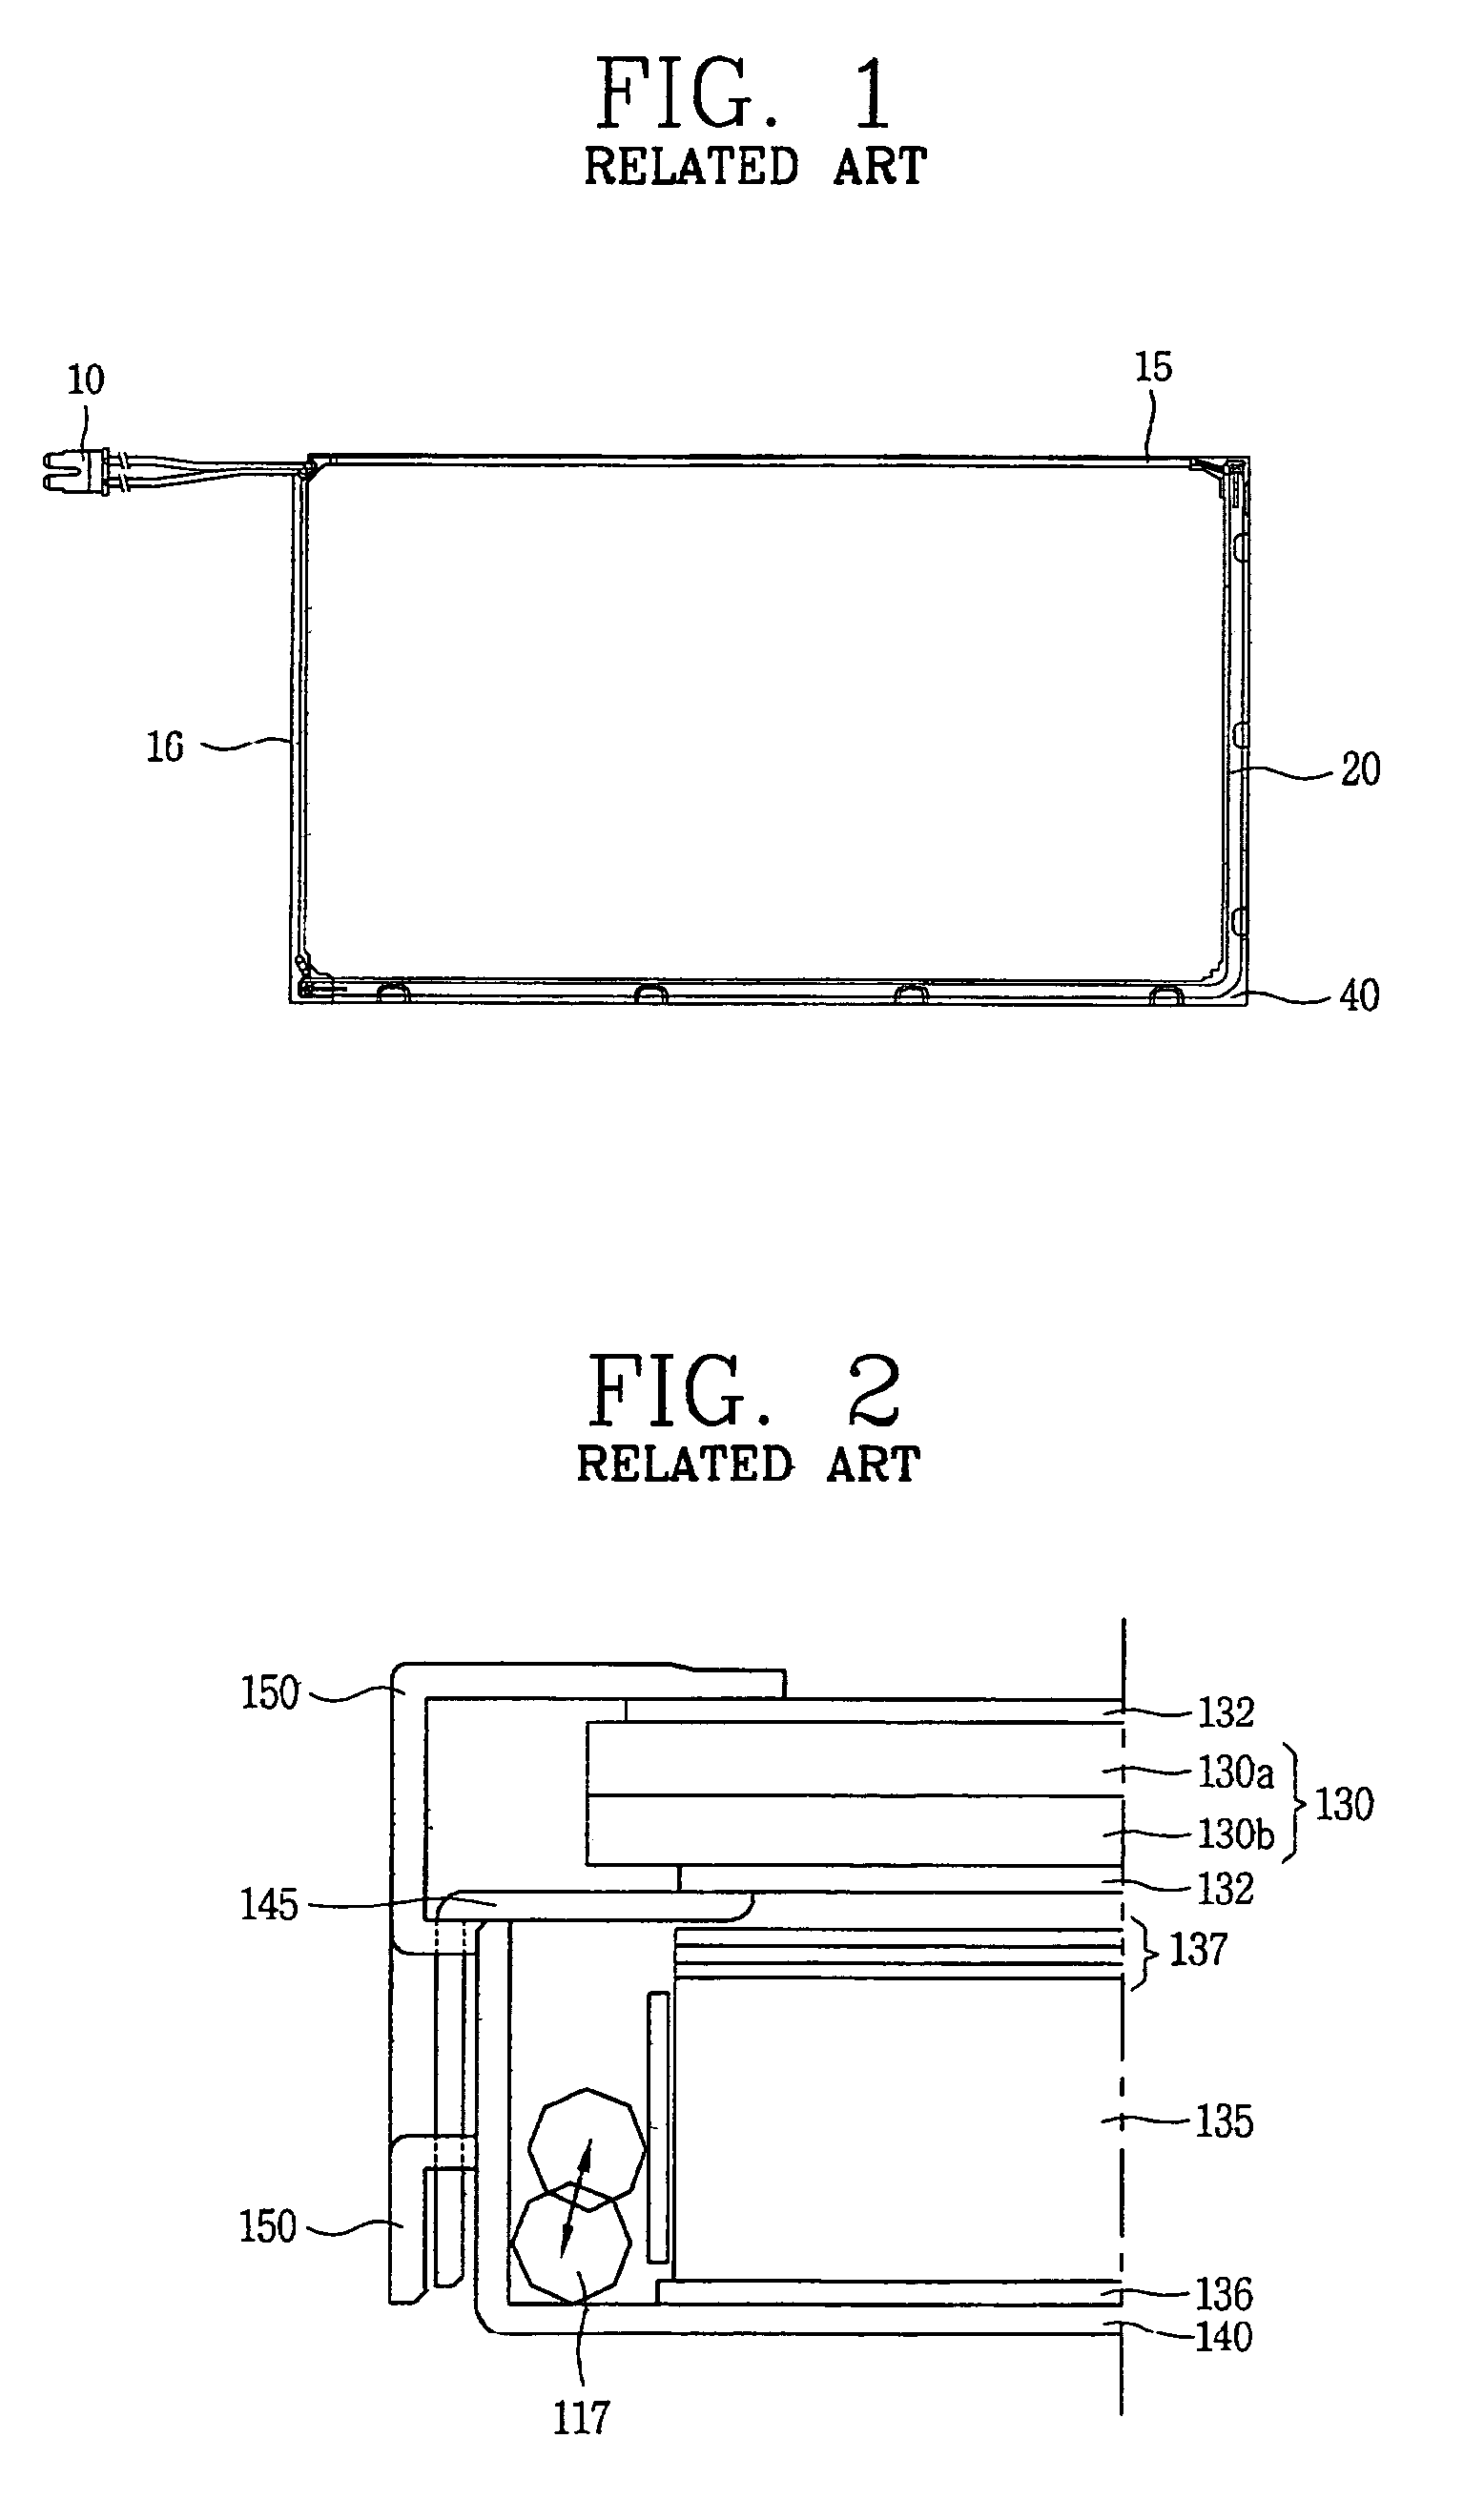 Liquid crystal display device comprising a protecting unit for enclosing a fastener and holding lamp wires